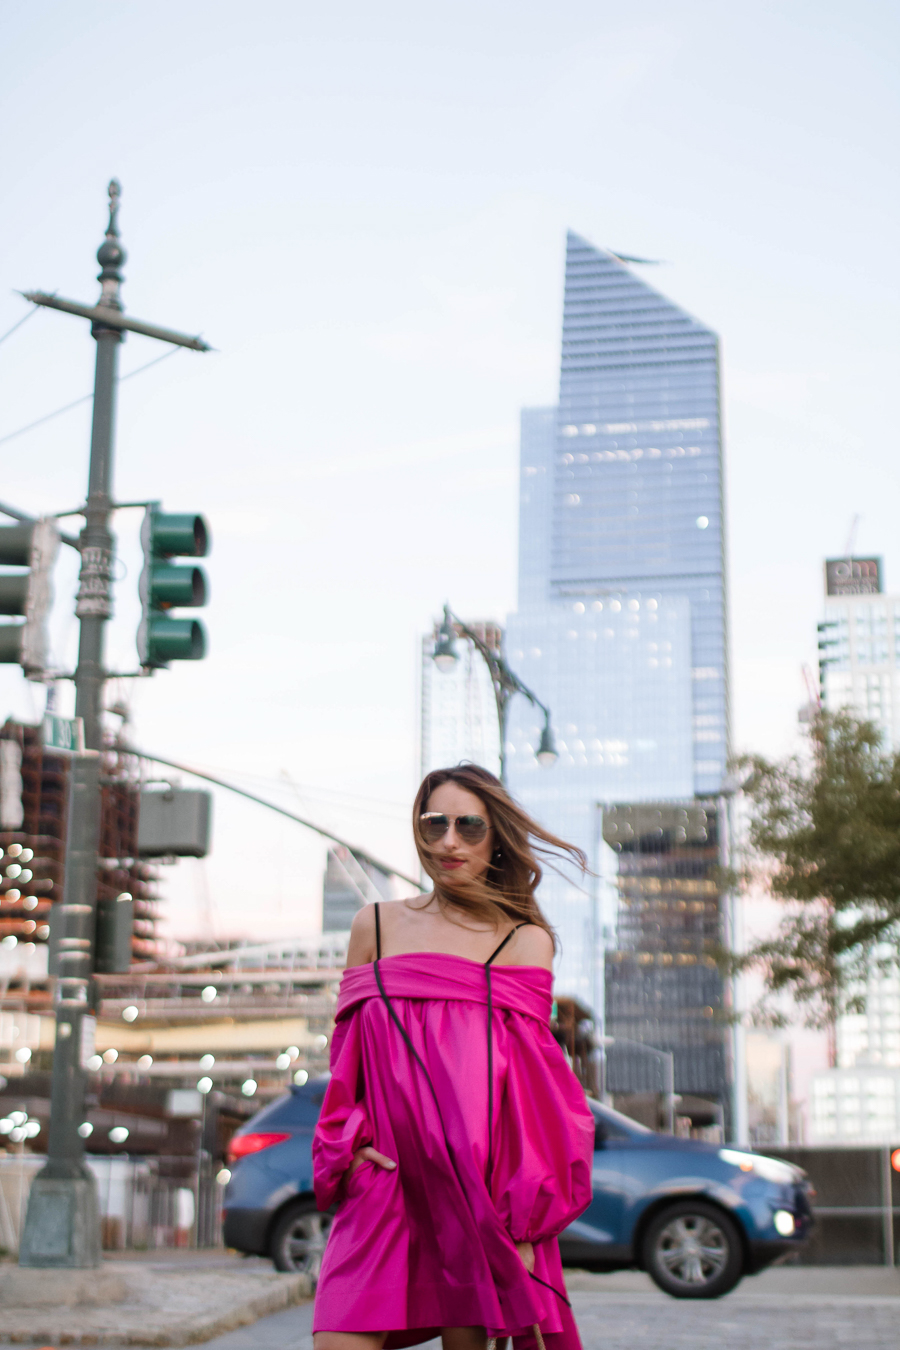 sabrina-chakici-clutch-and-carry-on-clutch-carry-on-uk-travel-blogger-nyfw-isa-arfen-pink-ress-gucci-silver-shoes-net-a-porter-helicopter-7